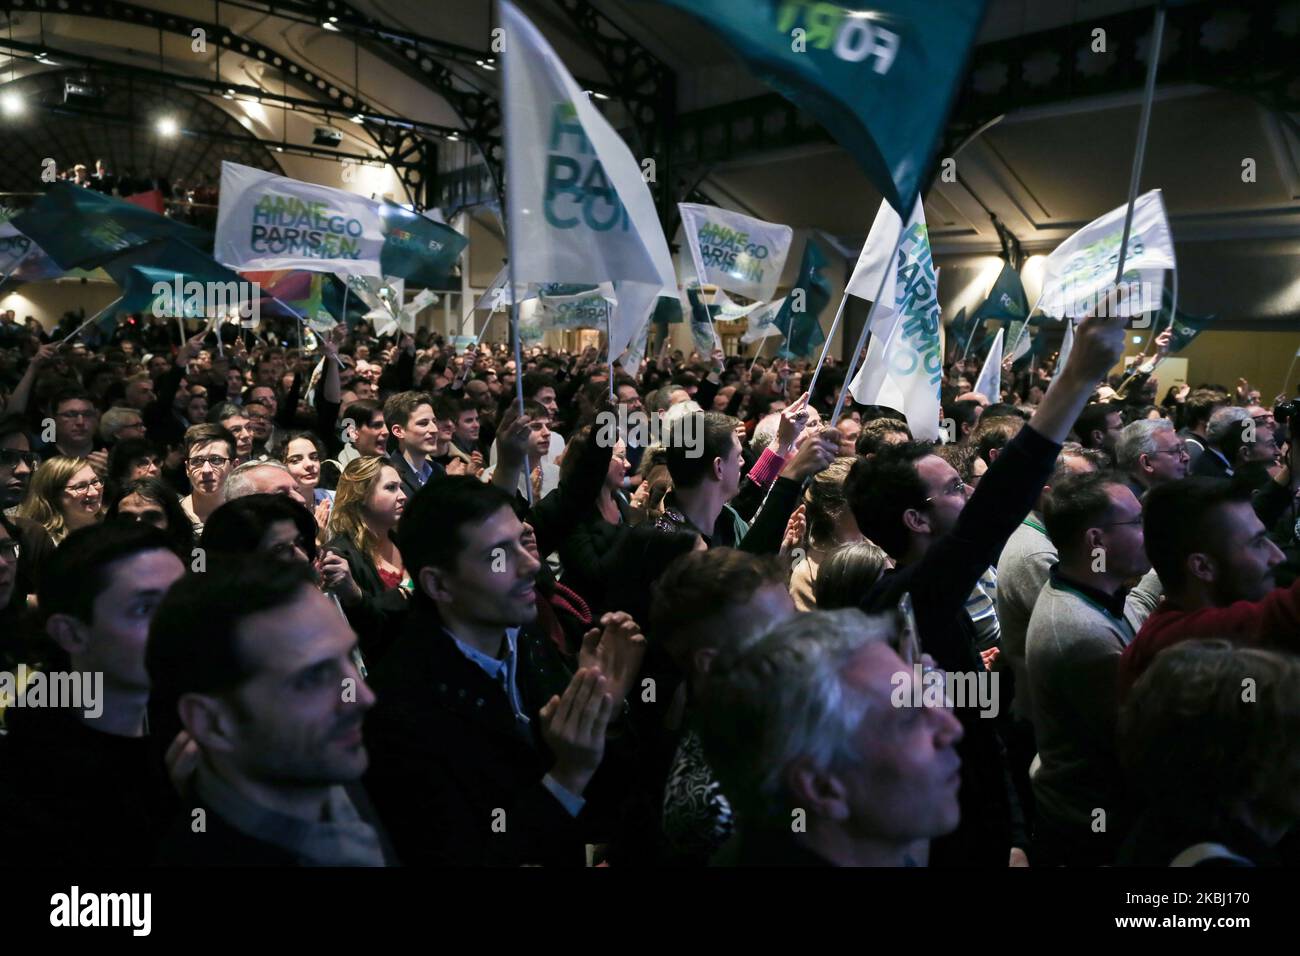 Paris Mayor and candidate for re-election Anne Hidalgo supporters wave flags during a campaign meeting at the Elysee Montmartre venue in Paris, on February 26, 2020, ahead of March 2020 mayoral elections in France. (Photo by Michel Stoupak/NurPhoto) Stock Photo